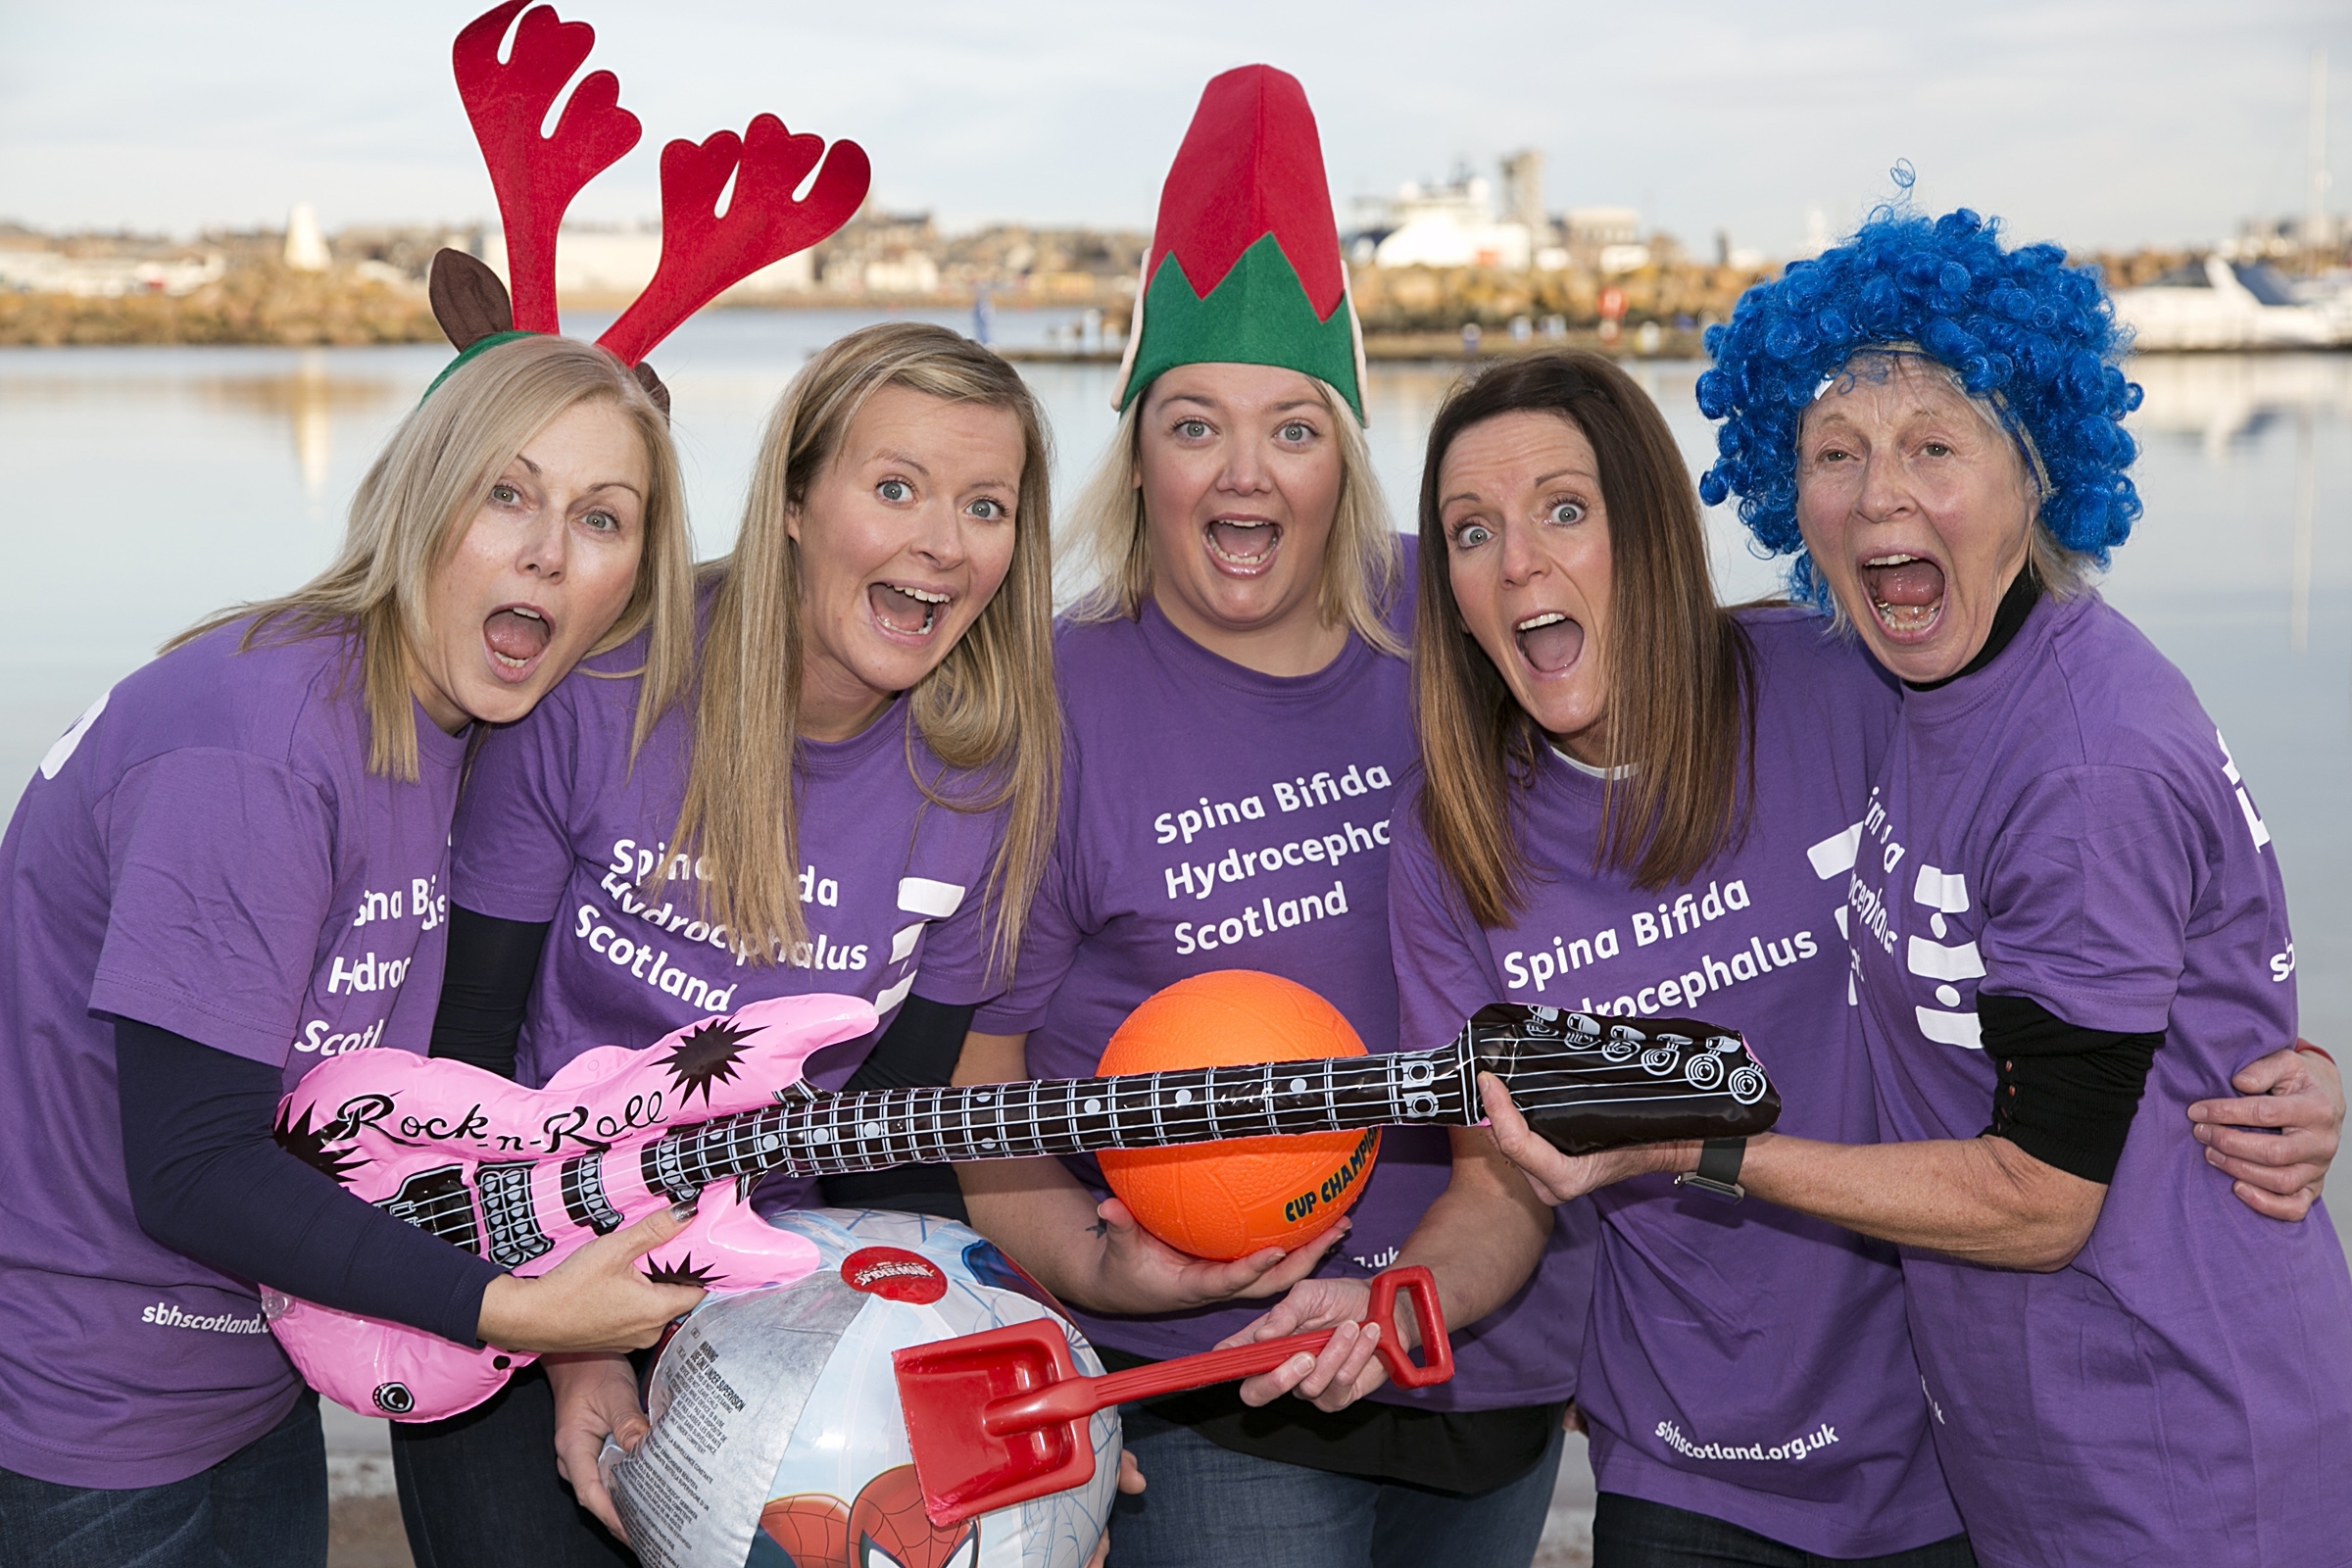 People are being sought to take part in the first Peterhead Plunge to raise funds for Spina Bifida Hydrocephalus (SBH) Scotland.

L-R: Lynn Duncan, Vicki Forman, Holly Taylor North of Scotland regional fundraiser for SBH Scotland, Denise Keith, Linda Mathers.